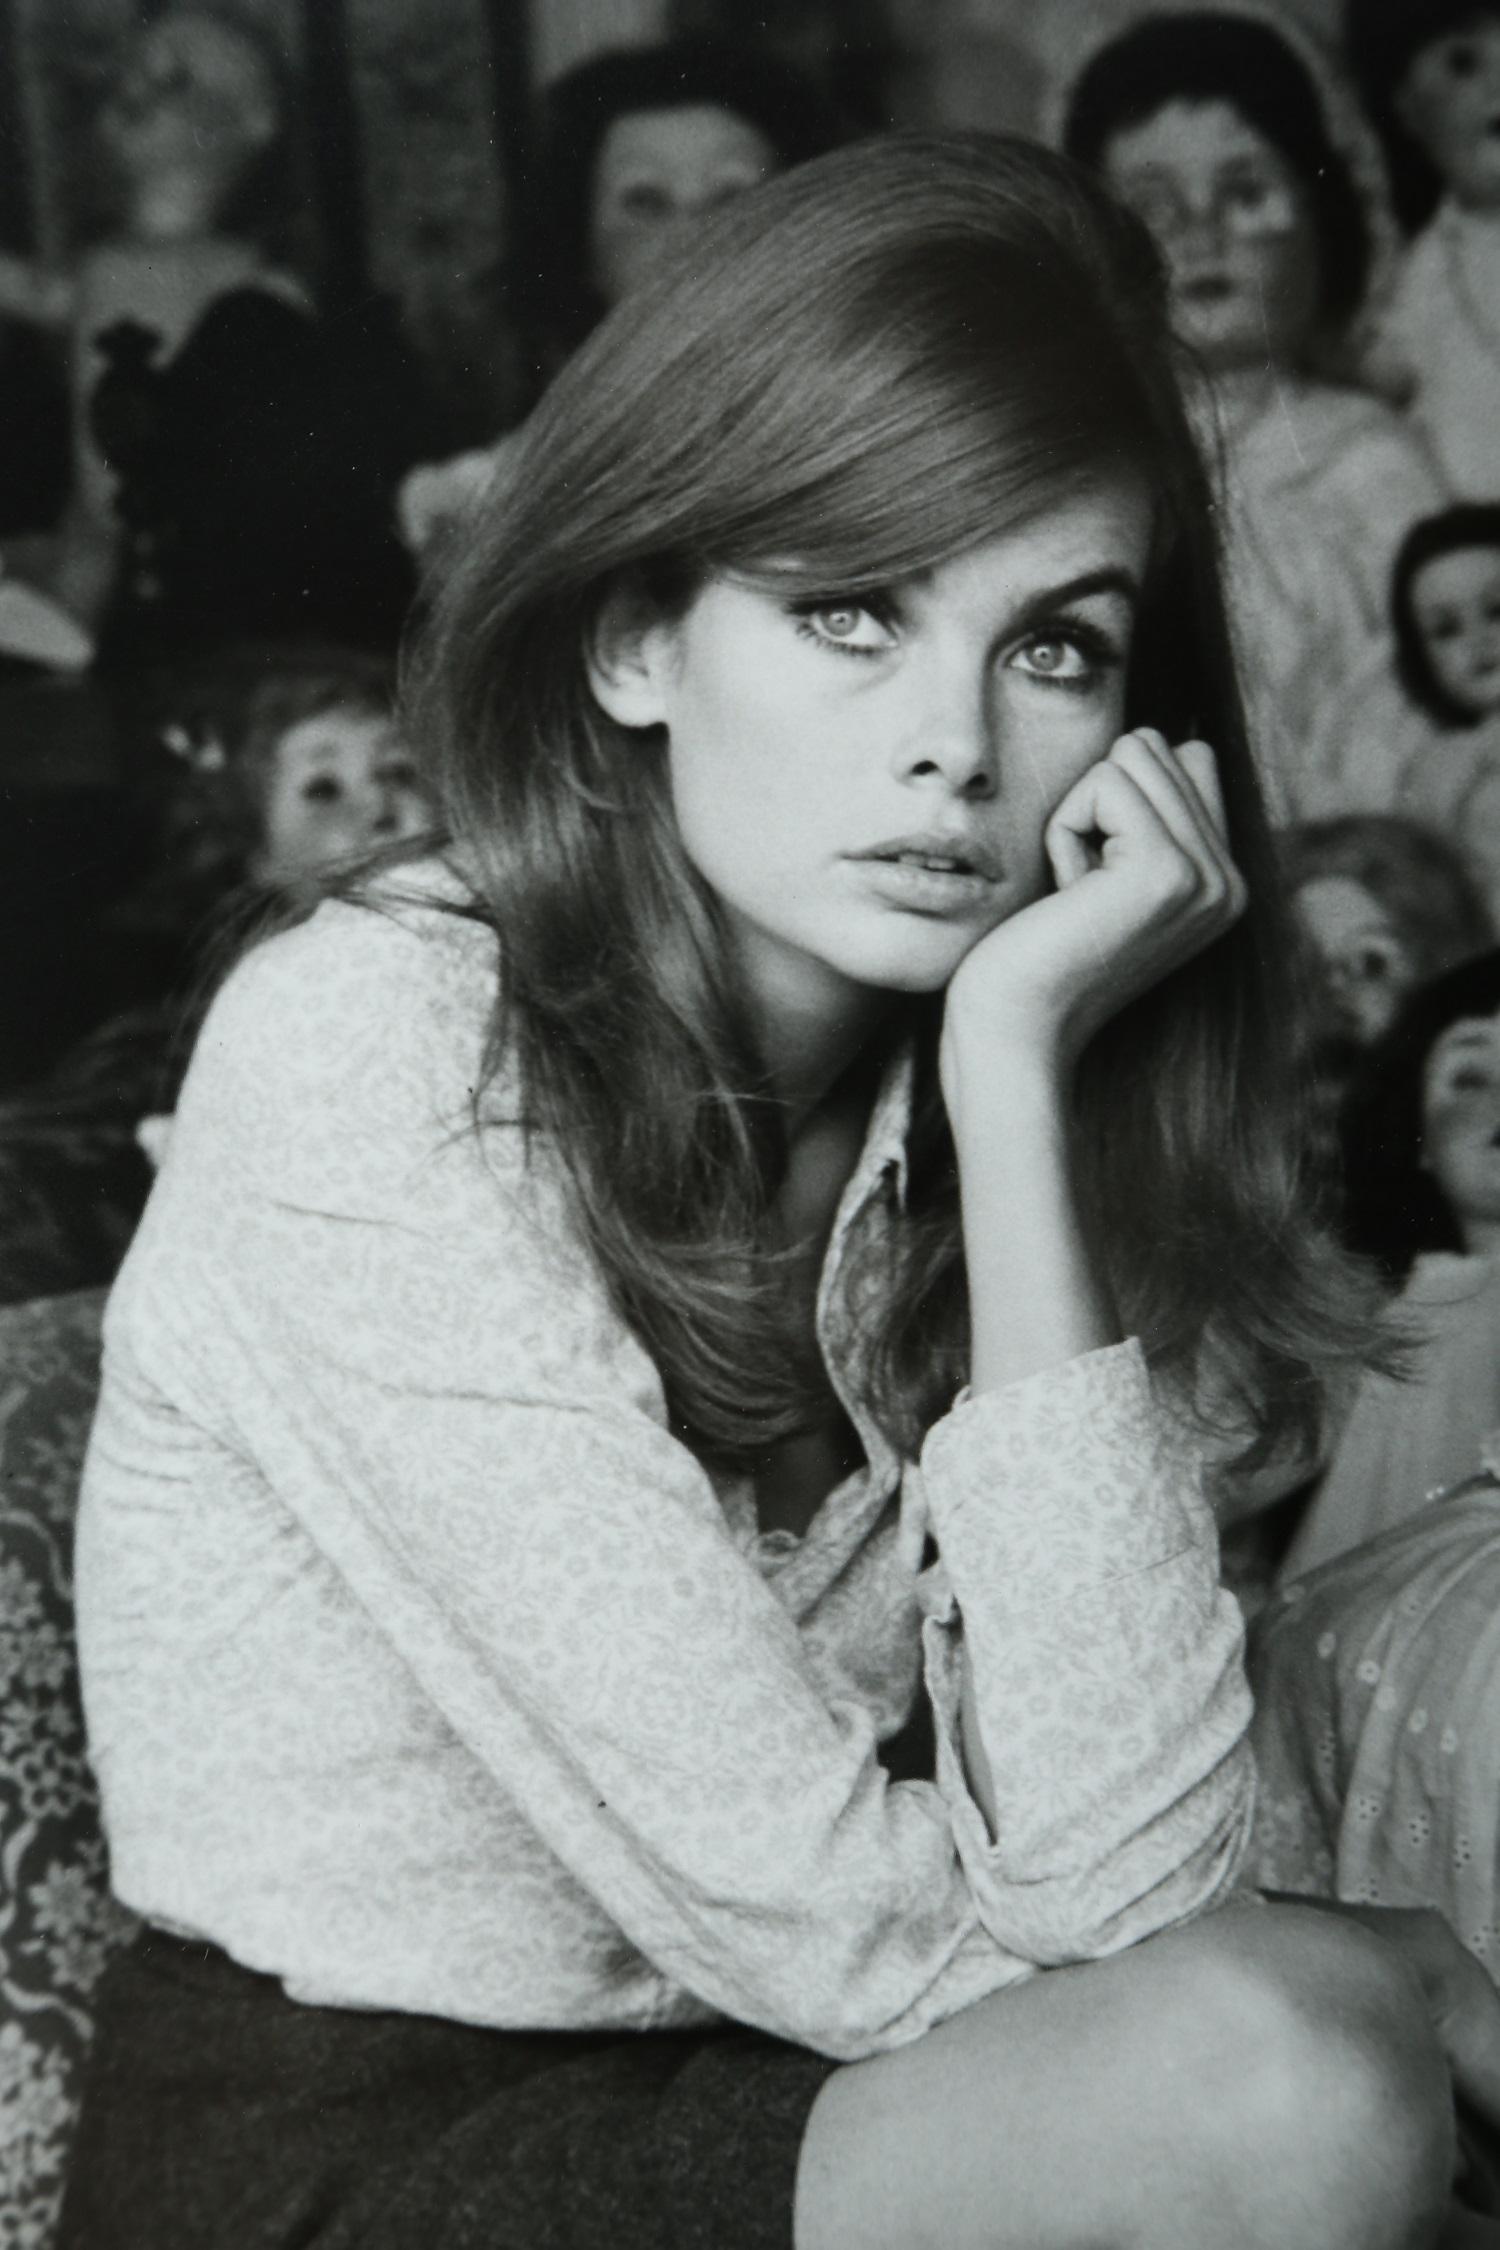 British Terry O' Neill Photograph of Jean Shrimpton in Black and White, 1964